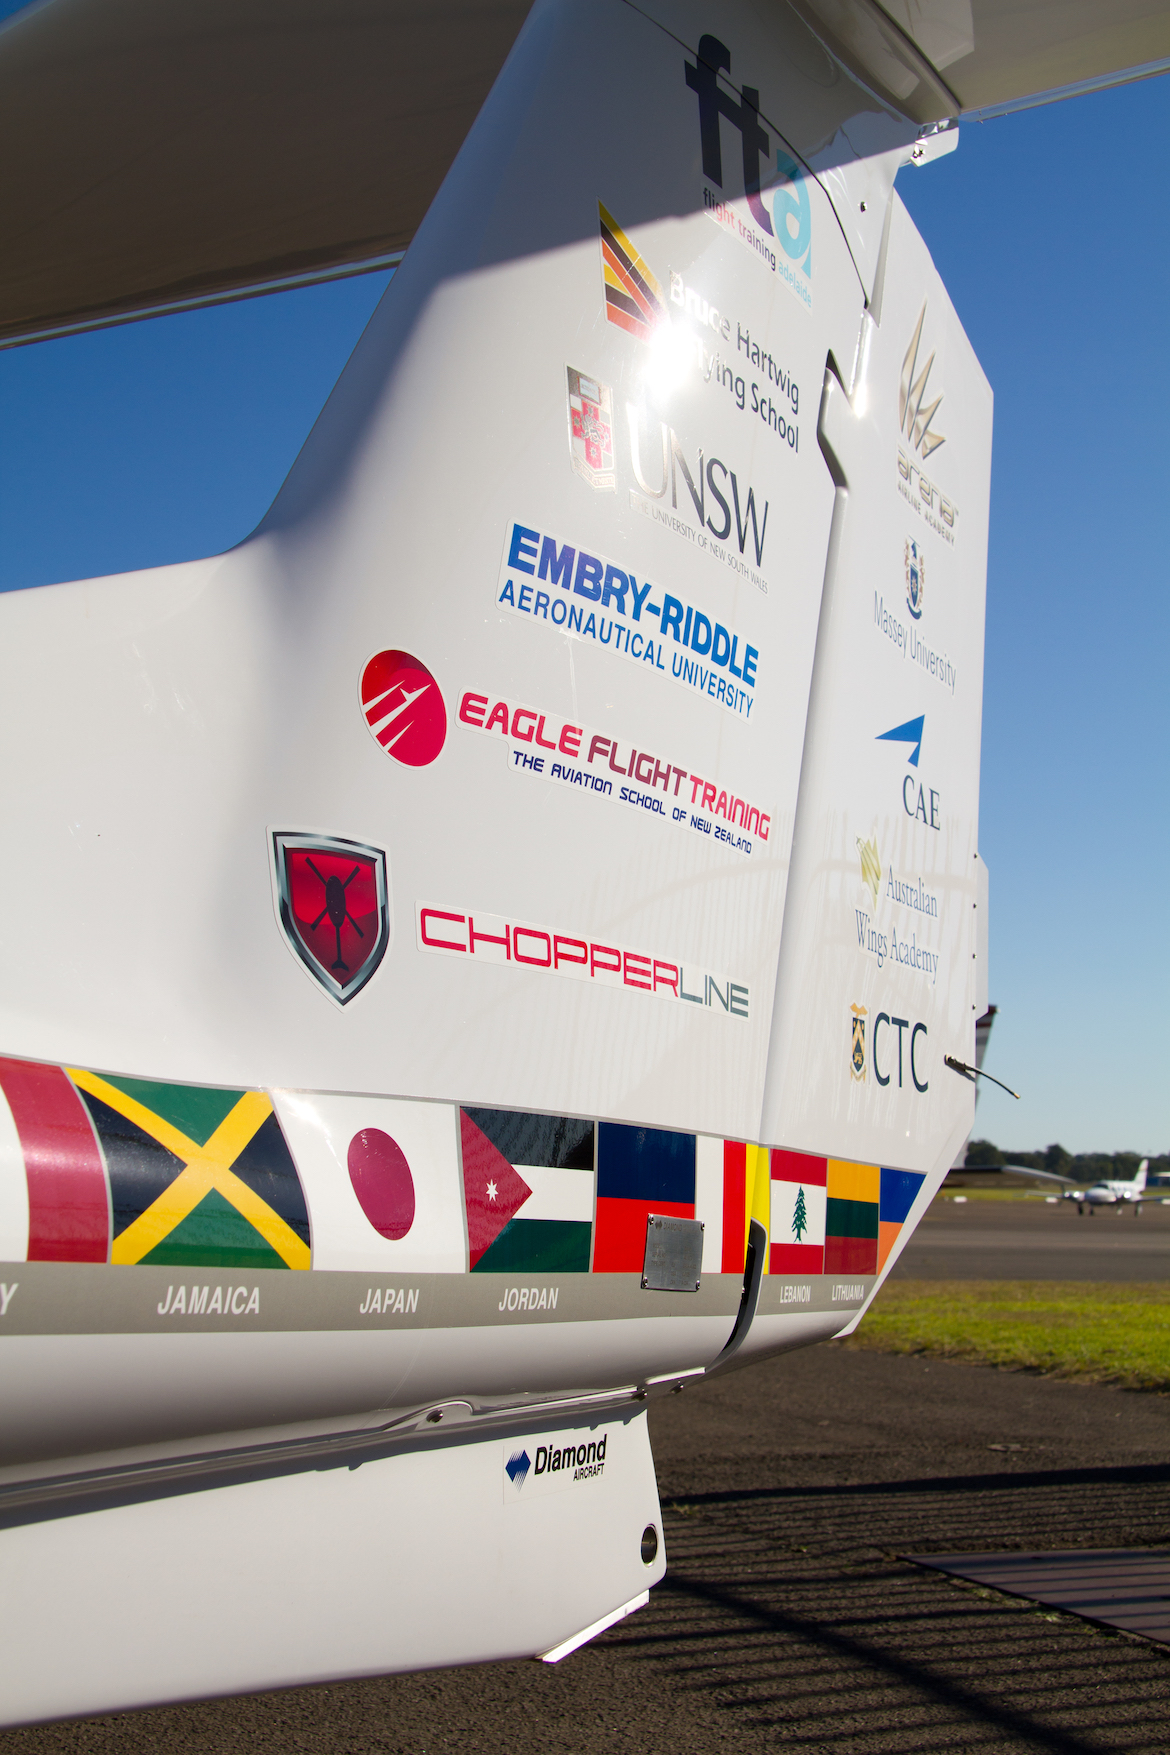 The DA40 XLT has the names flight training institutions on the fin. (Seth Jaworski)